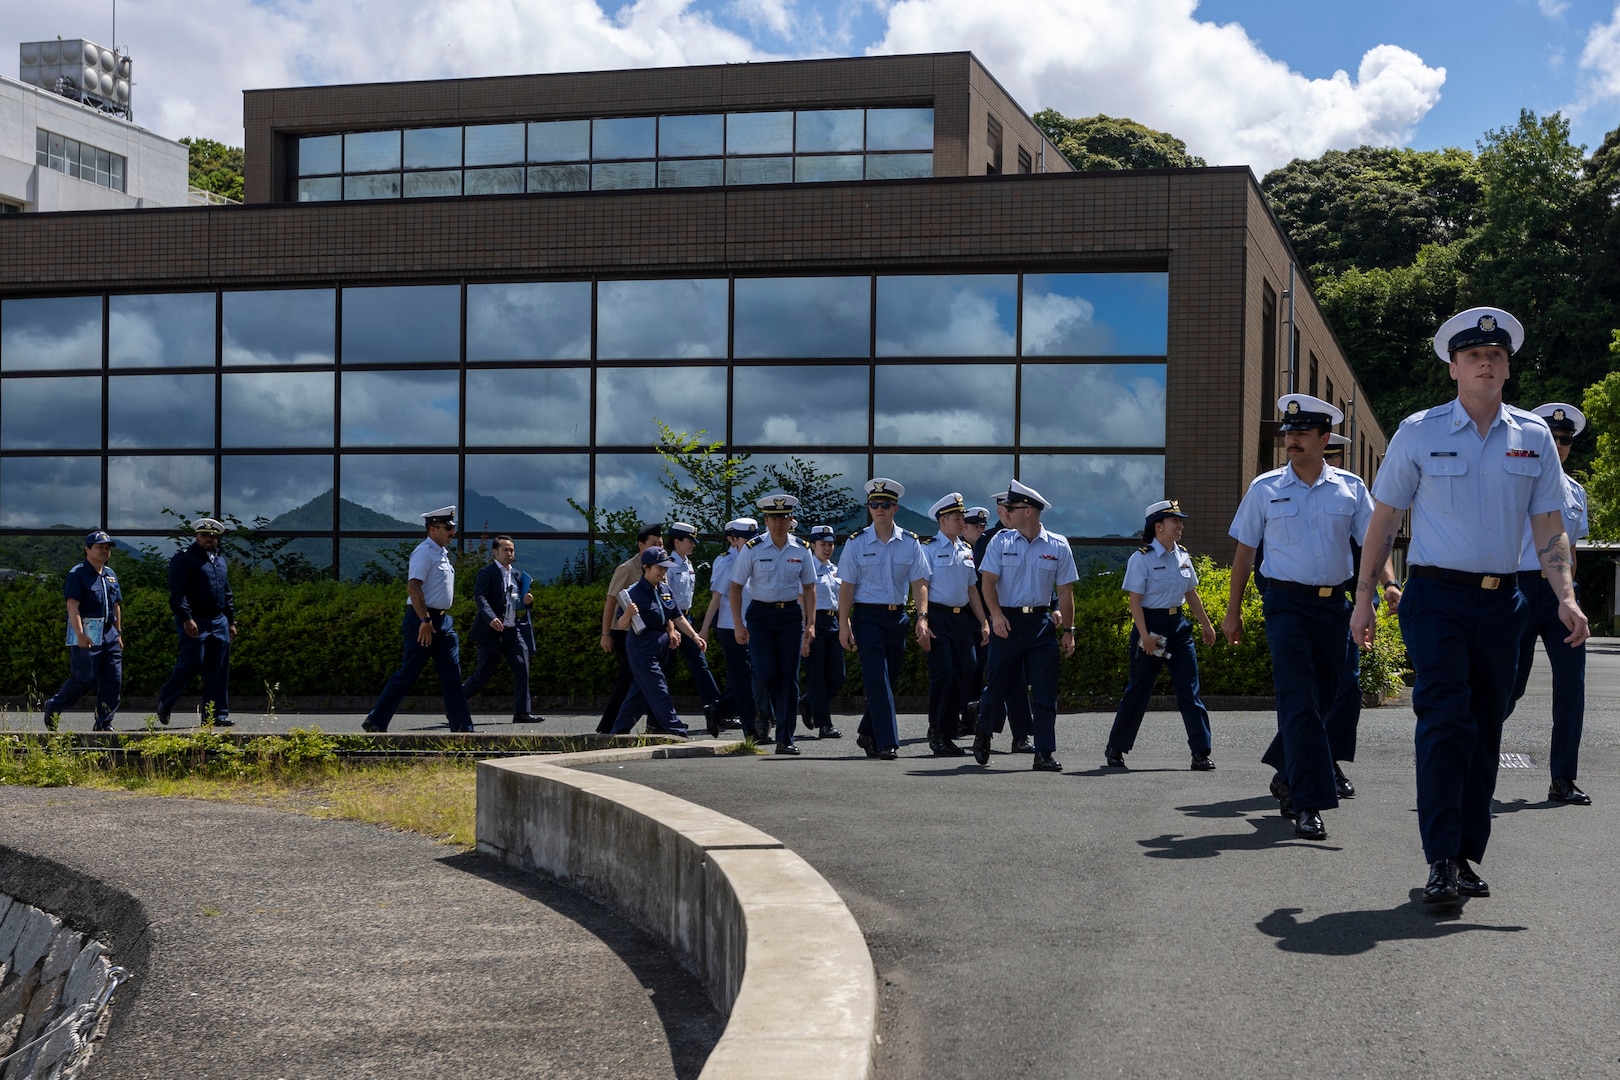 Japanese instructors at the Japan Coast Guard School lead U.S. Coast Guardsmen, assigned to the U.S. Coast Guard Cutter Waesche (WMSL-751), on a school tour in Maizuru, Japan, June 5, 2024. The tour offered U.S. Coast Guardsmen a better understanding of the training members of the Japanese Coast Guard receive prior to service. U.S. Coast Guard missions in the Indo-Pacific focus on issues directly supporting and advancing our regional partners’ efforts to protect fish stocks, ensure safety of life at sea, support environmental response, and provide disaster relief. (U.S. Marine Corps photo by Cpl. Elijah Murphy)